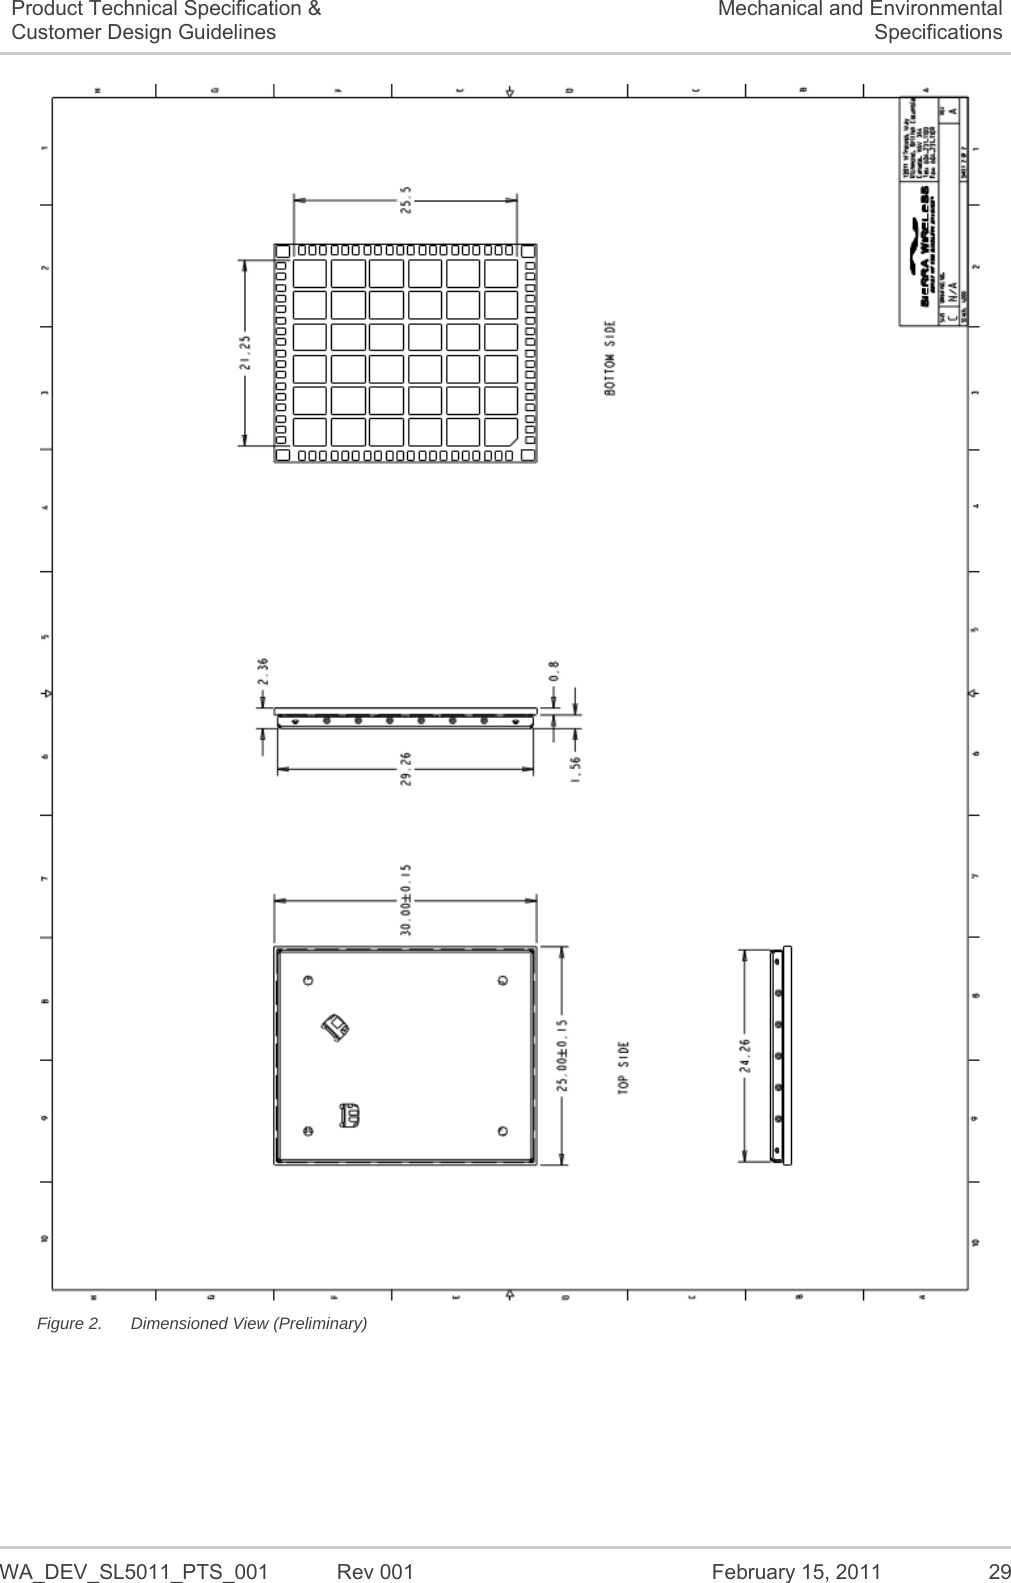   WA_DEV_SL5011_PTS_001  Rev 001  February 15, 2011  29 Product Technical Specification &amp; Customer Design Guidelines Mechanical and Environmental Specifications  Figure 2.  Dimensioned View (Preliminary) 